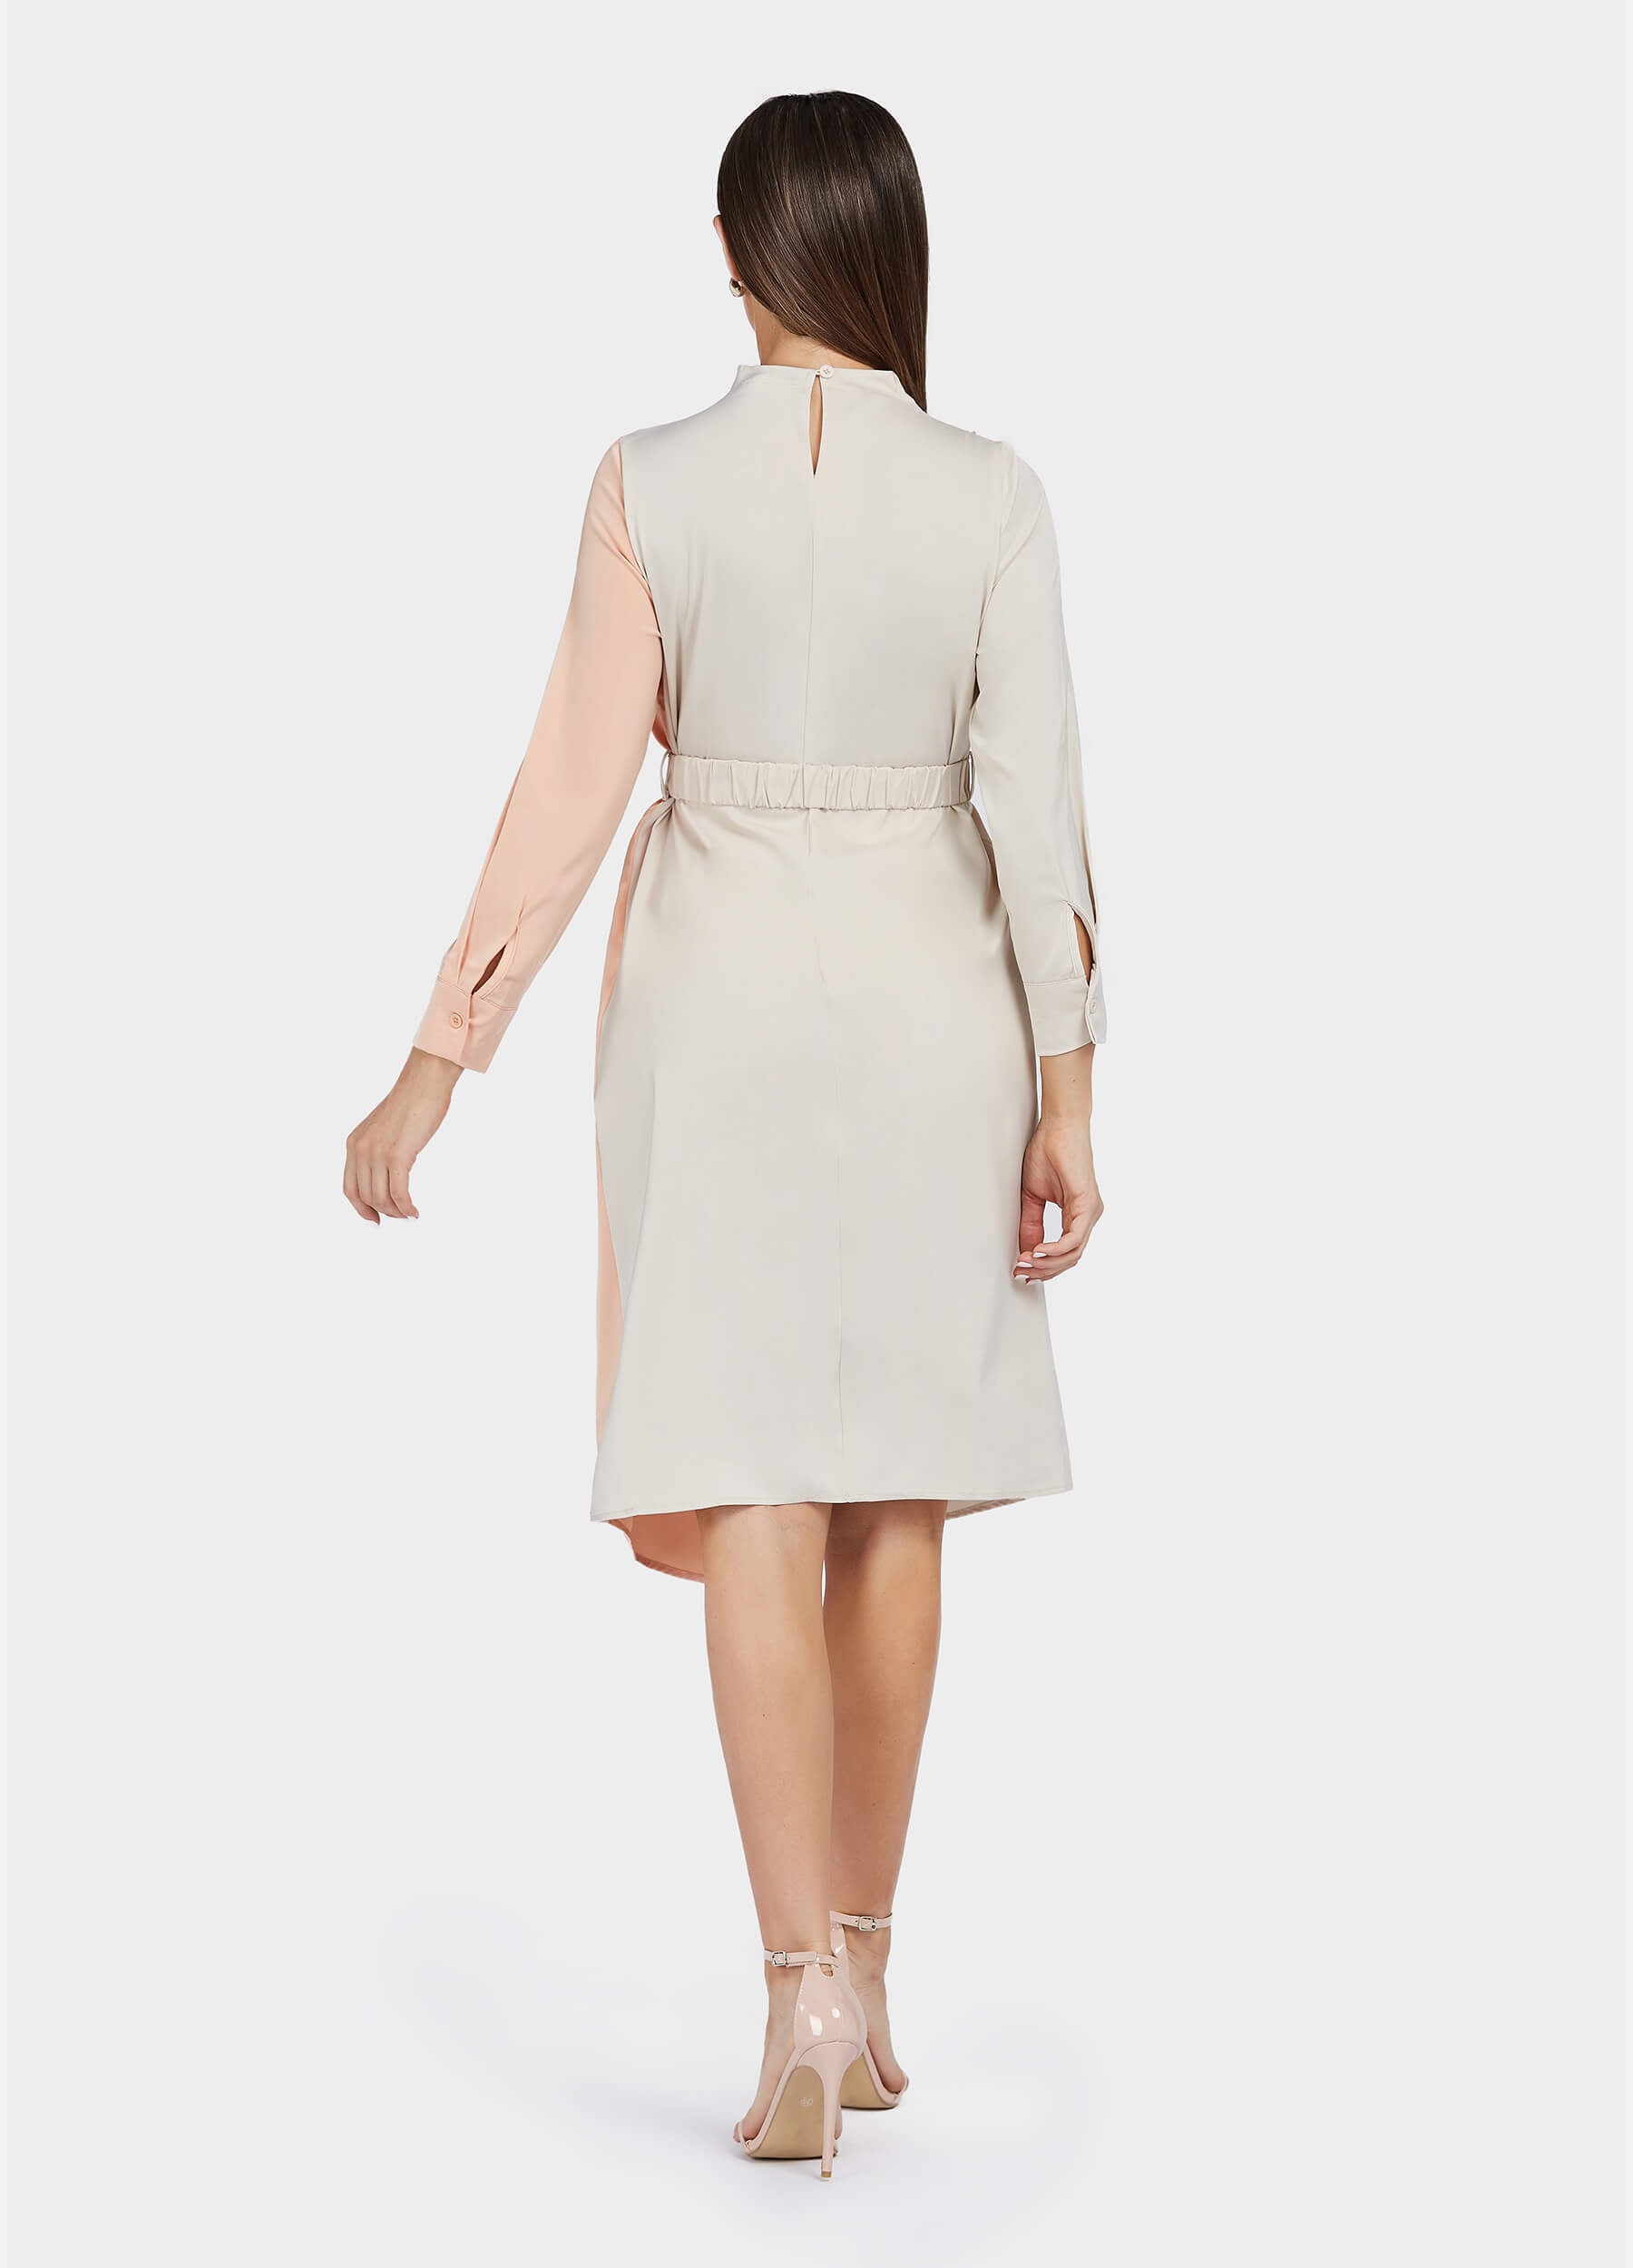 Women's Belted Colorblock High-Neck Long Sleeve Dress-Apricot&Pink back view